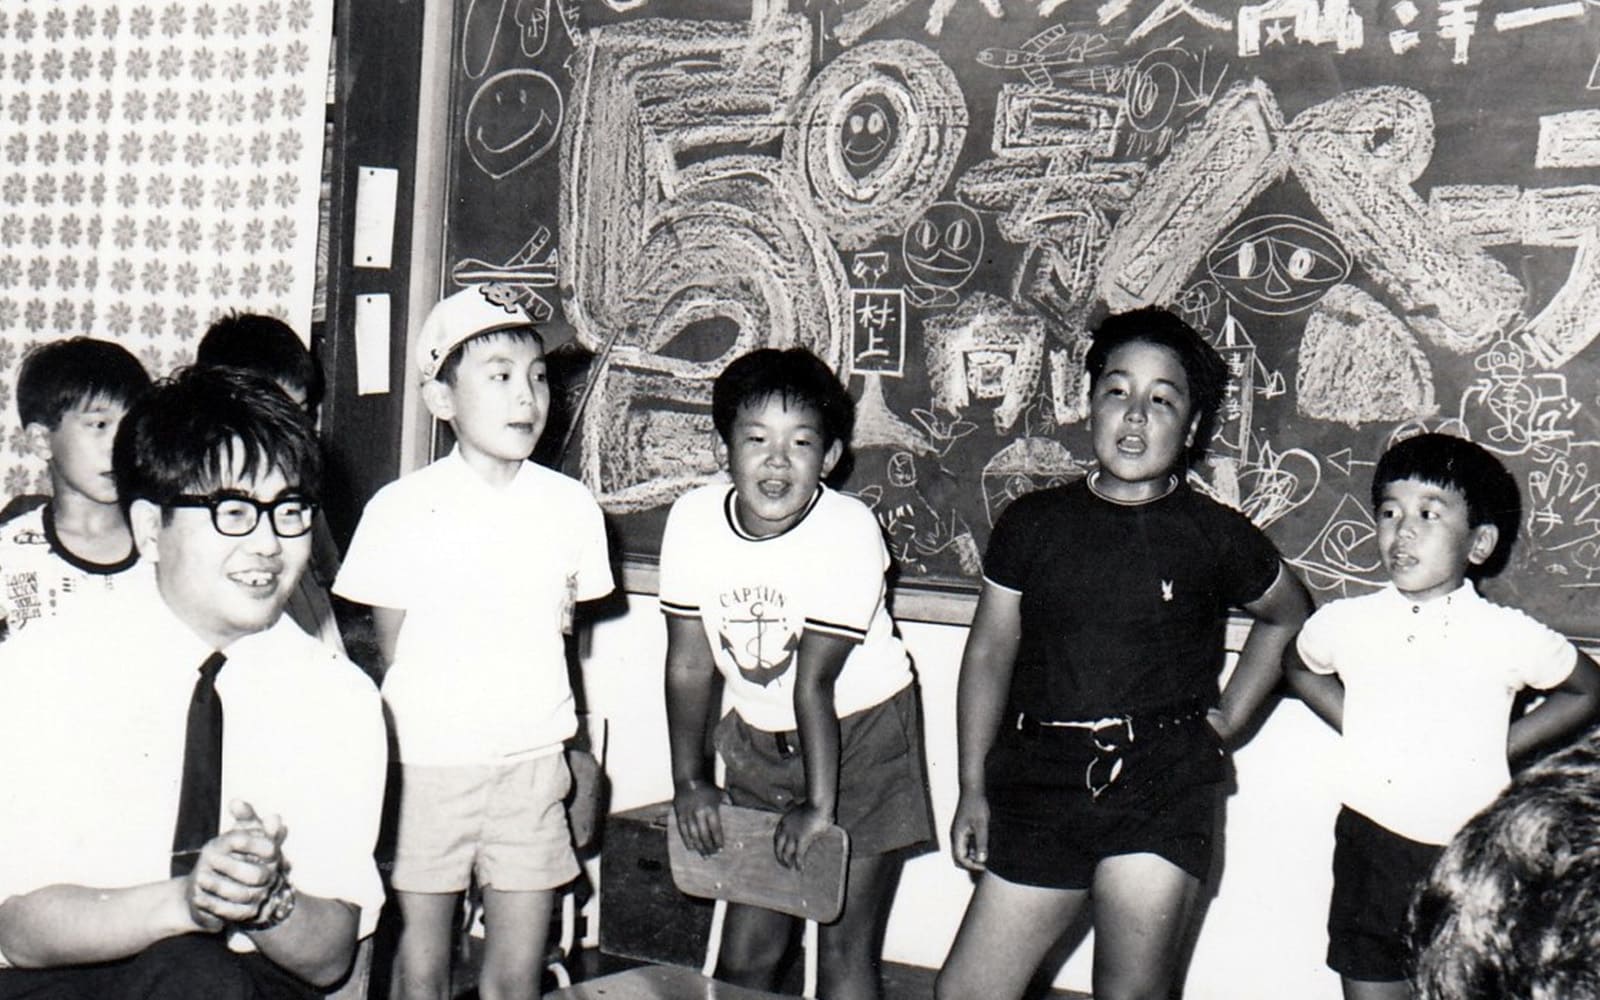 Around this time, Mr. Mukoyama dedicated his efforts to “creating free and equal classrooms,”
focusing on educational activities beyond subject teaching. (Mukoyama Classroom “Big Party” 1972)